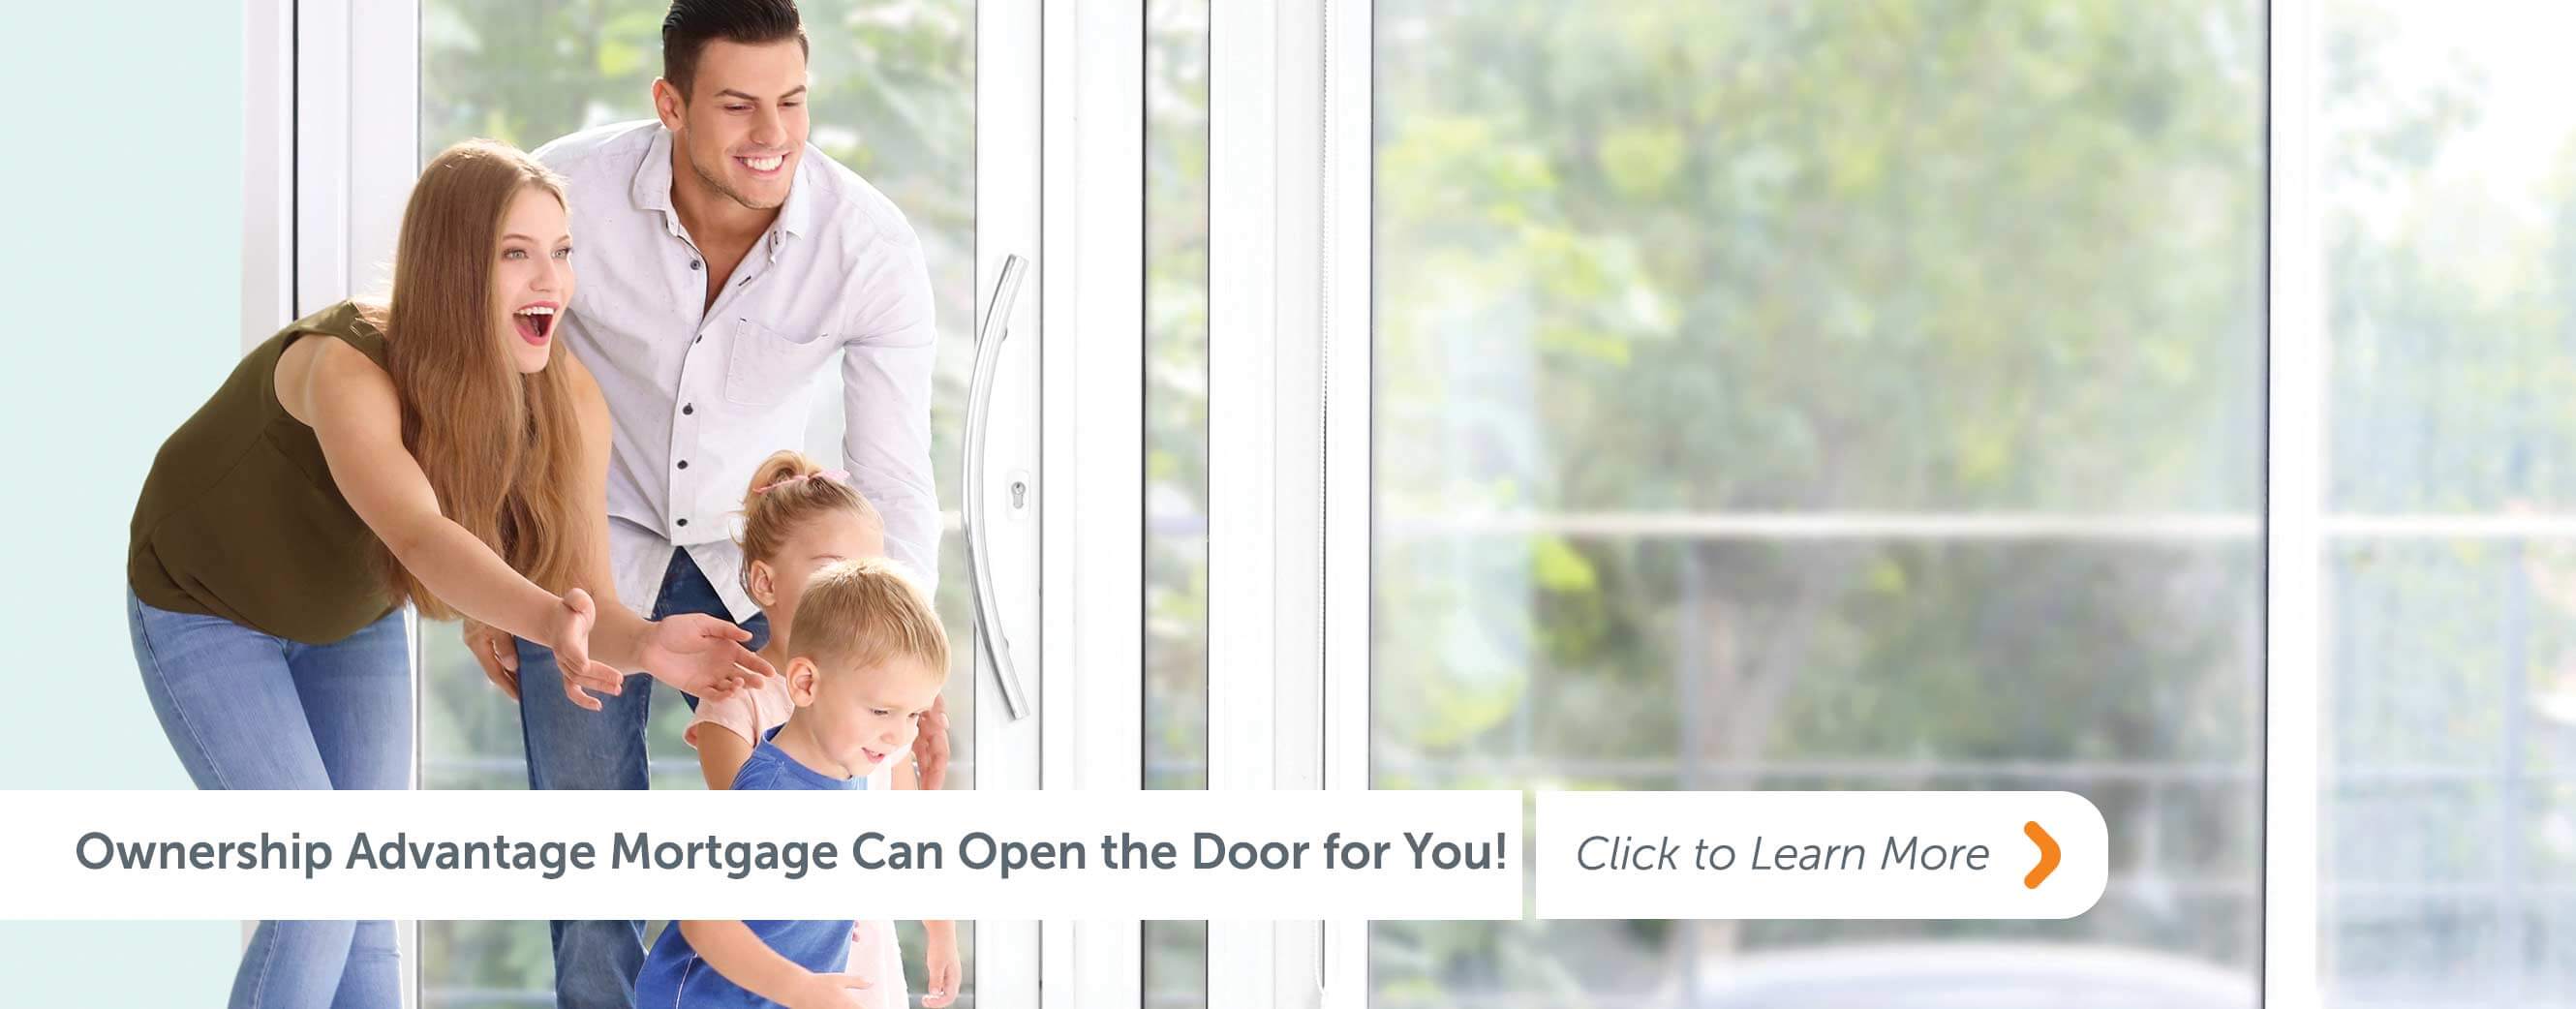 Ownership Advantage Mortgage Can Open the Door for You! Click to learn more